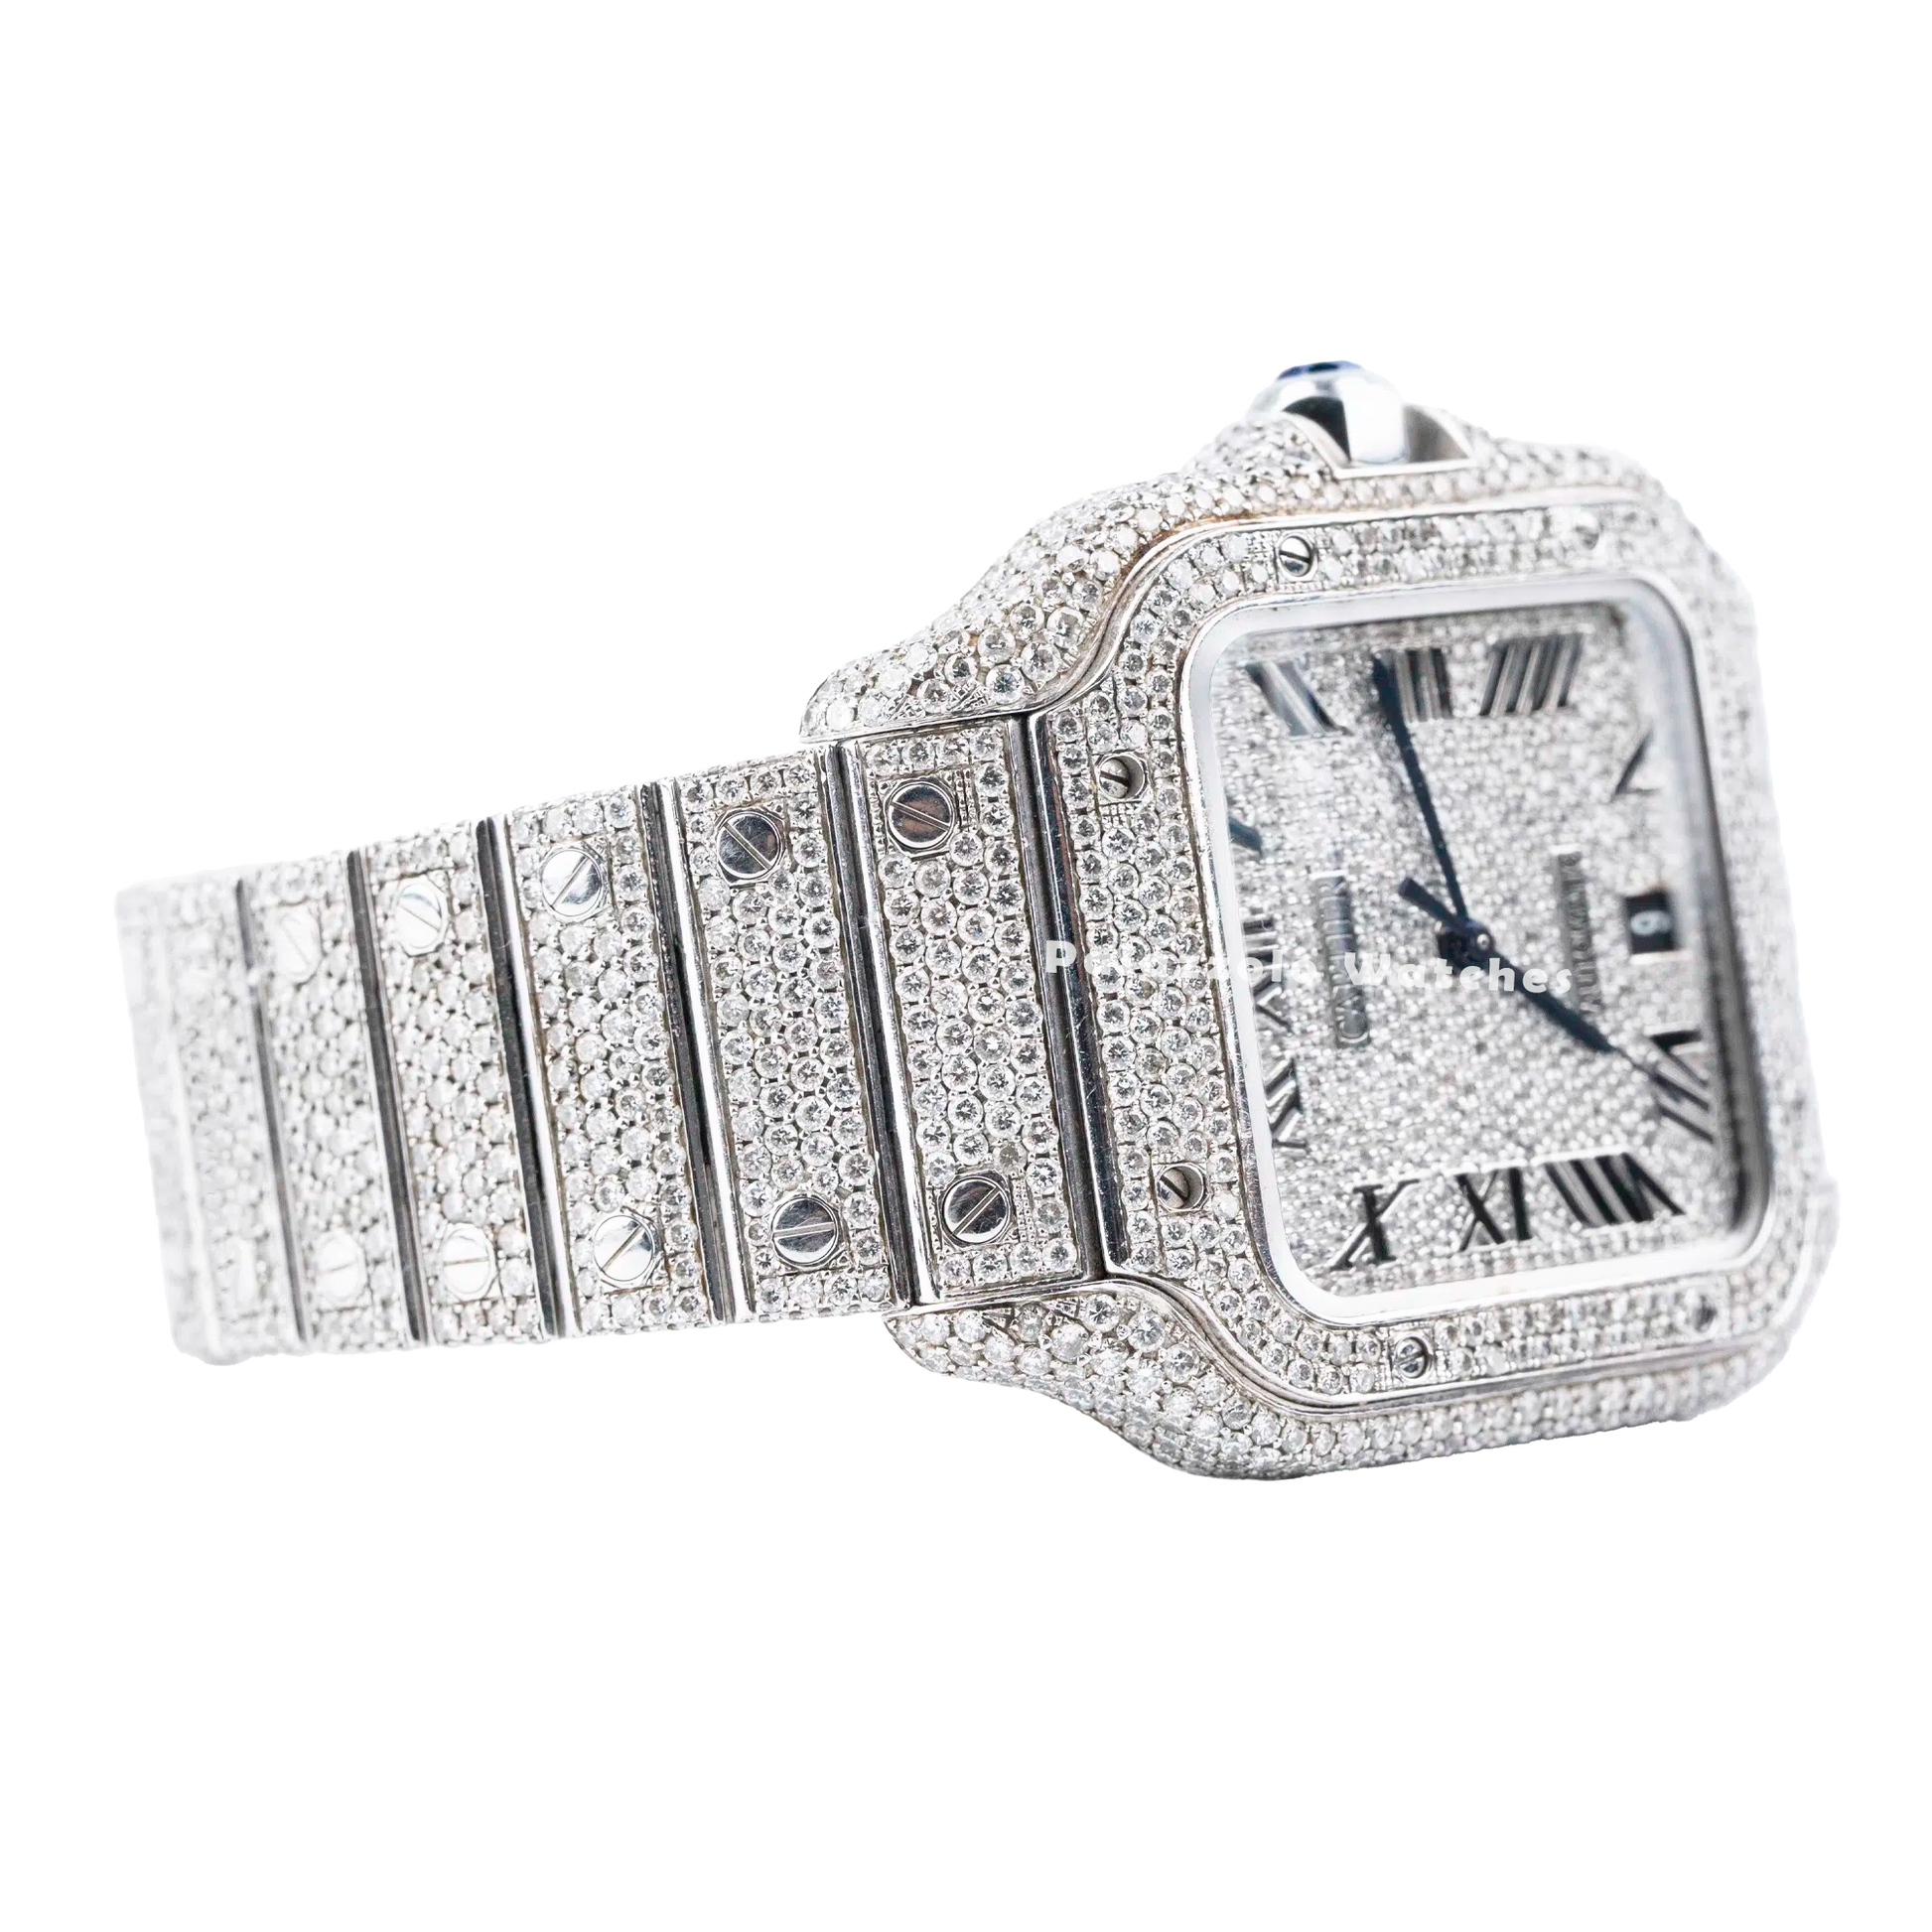 Iced Out Cartier Santos Stainless Steel with Aftermarket Diamond Dial - Palazzolo Watches